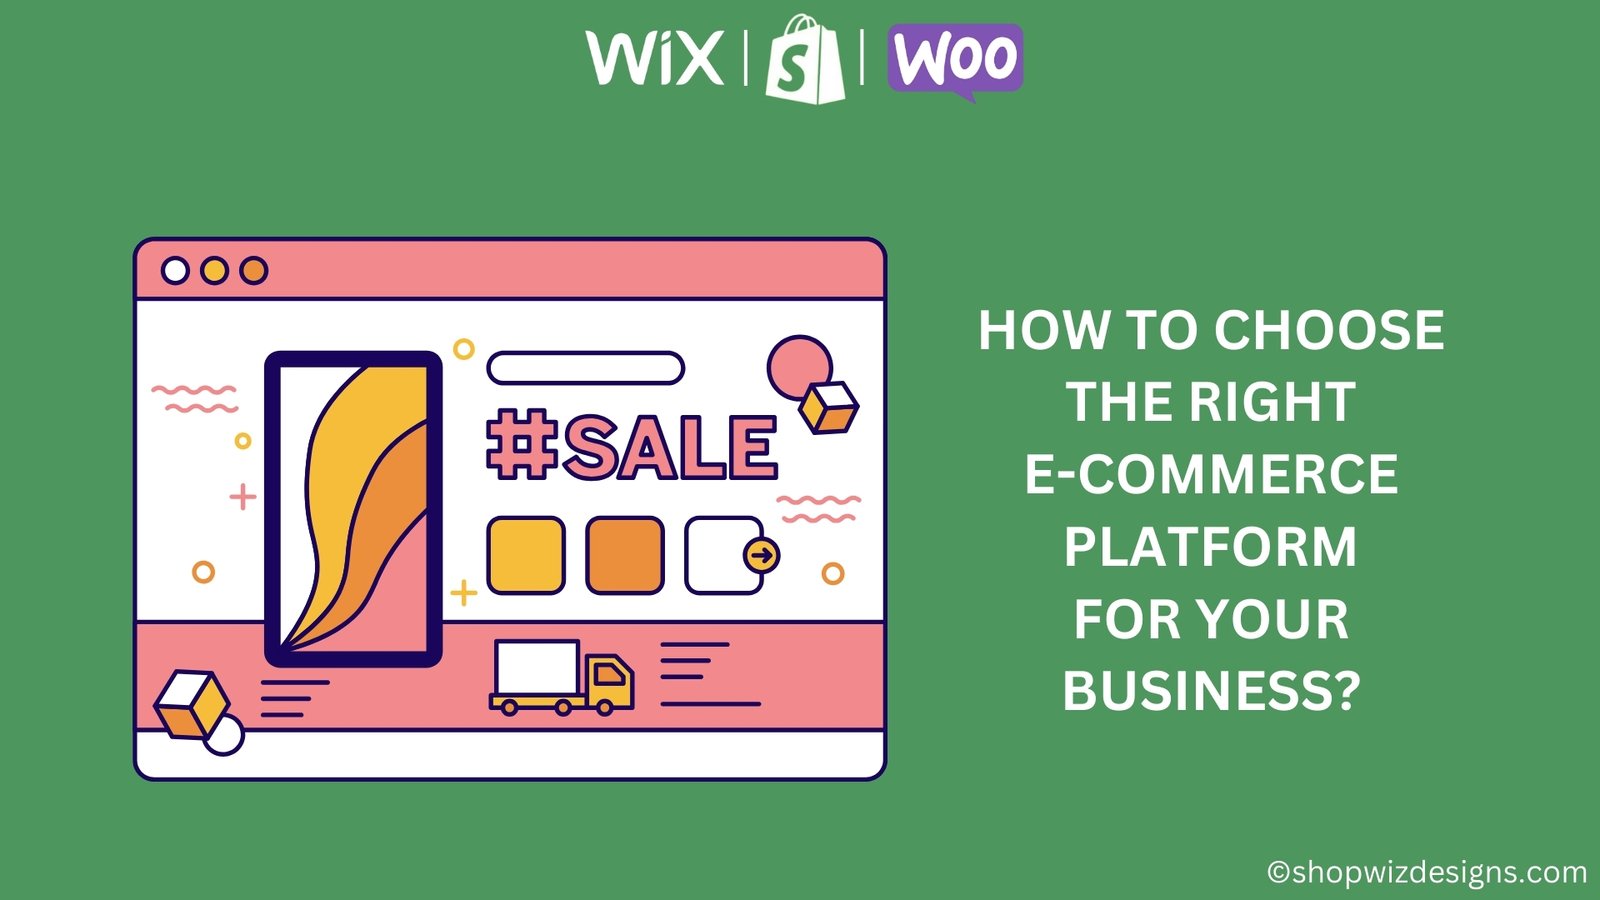 How to Choose the Right E-Commerce Platform for Your Business